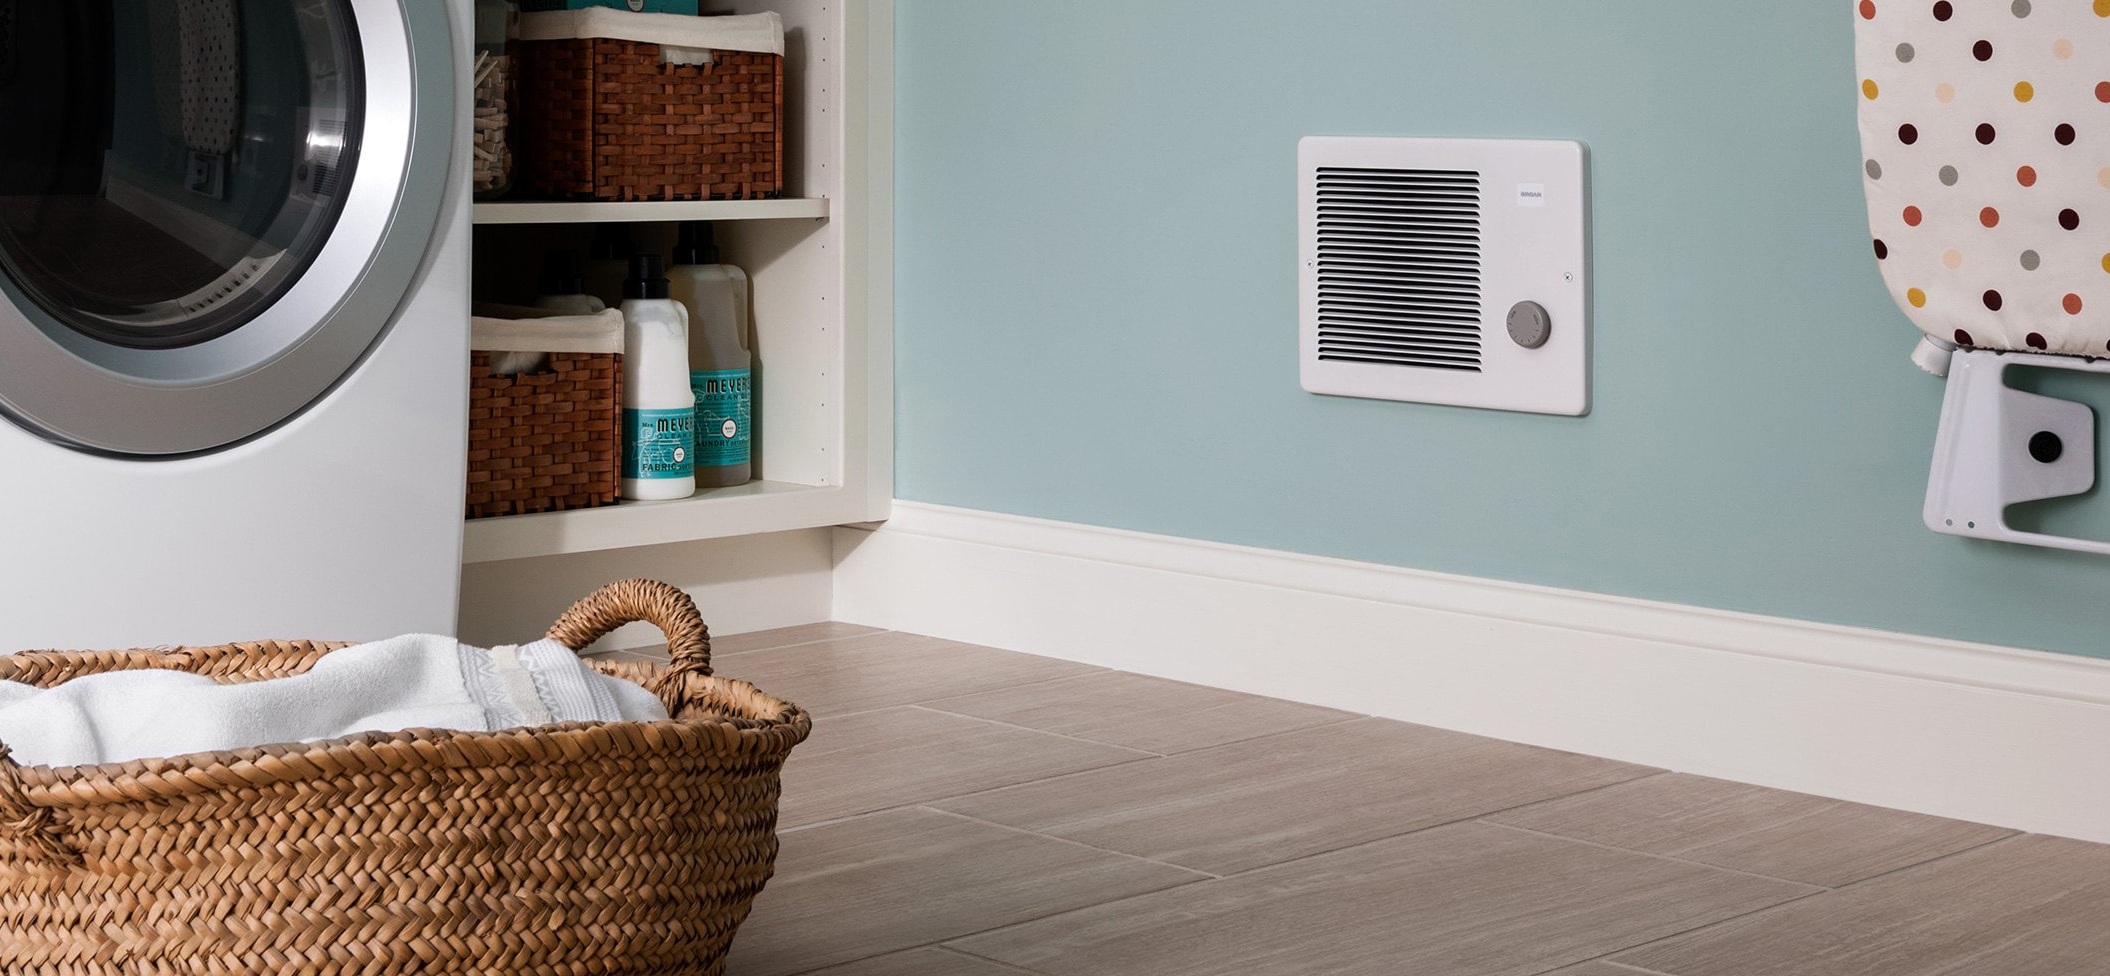 6 Best Bathroom Heaters Reviewed In Detail Apr 2020 for size 2110 X 976